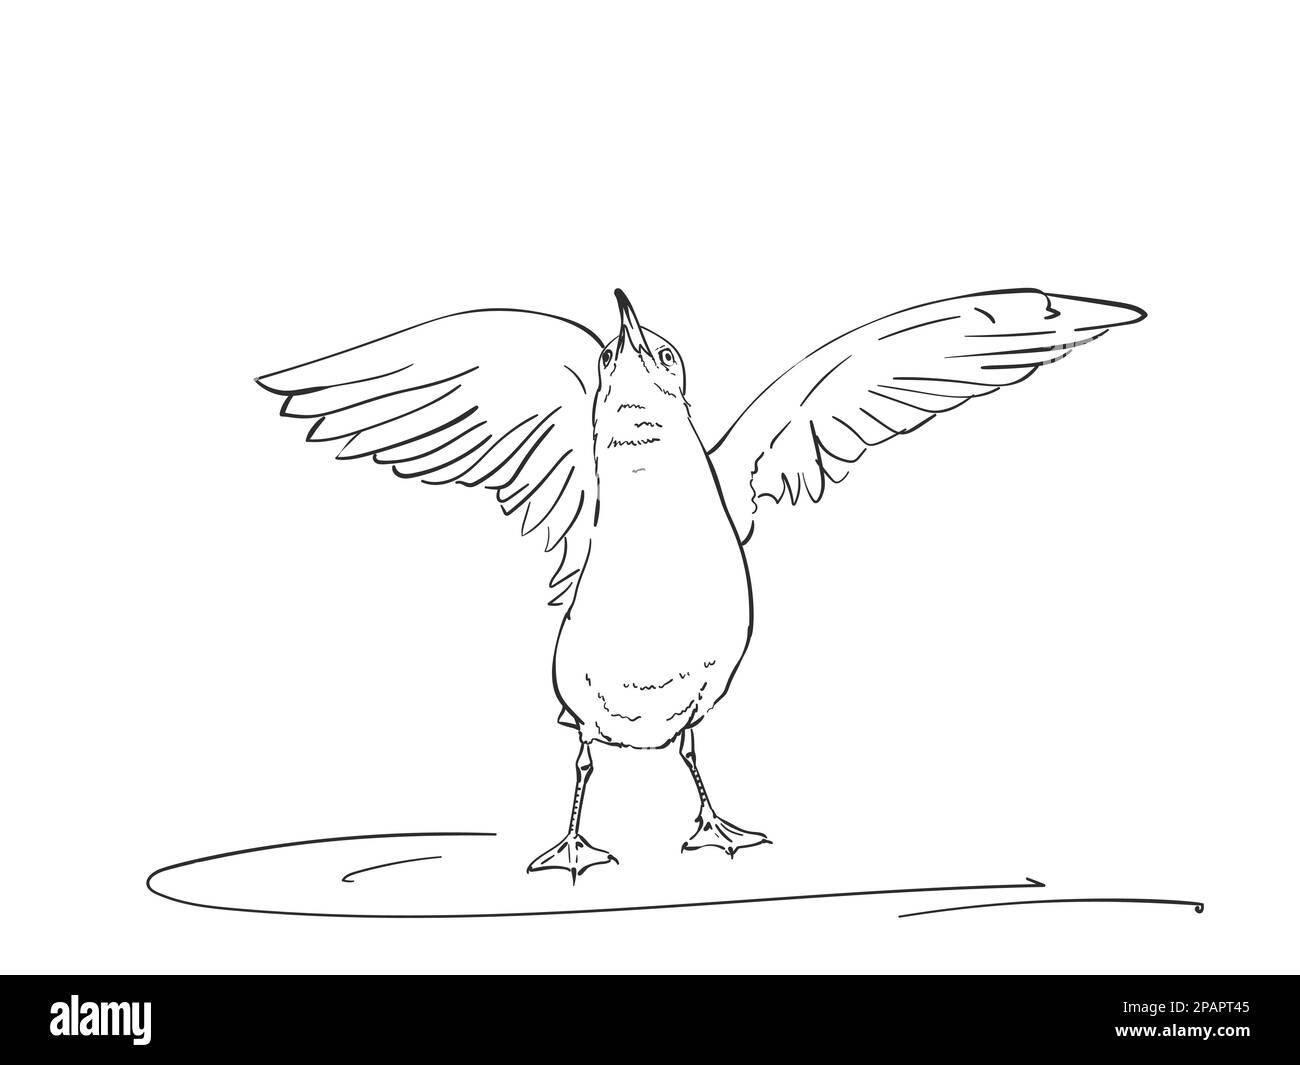 80 Angry Seagull Illustrations RoyaltyFree Vector Graphics  Clip Art   iStock